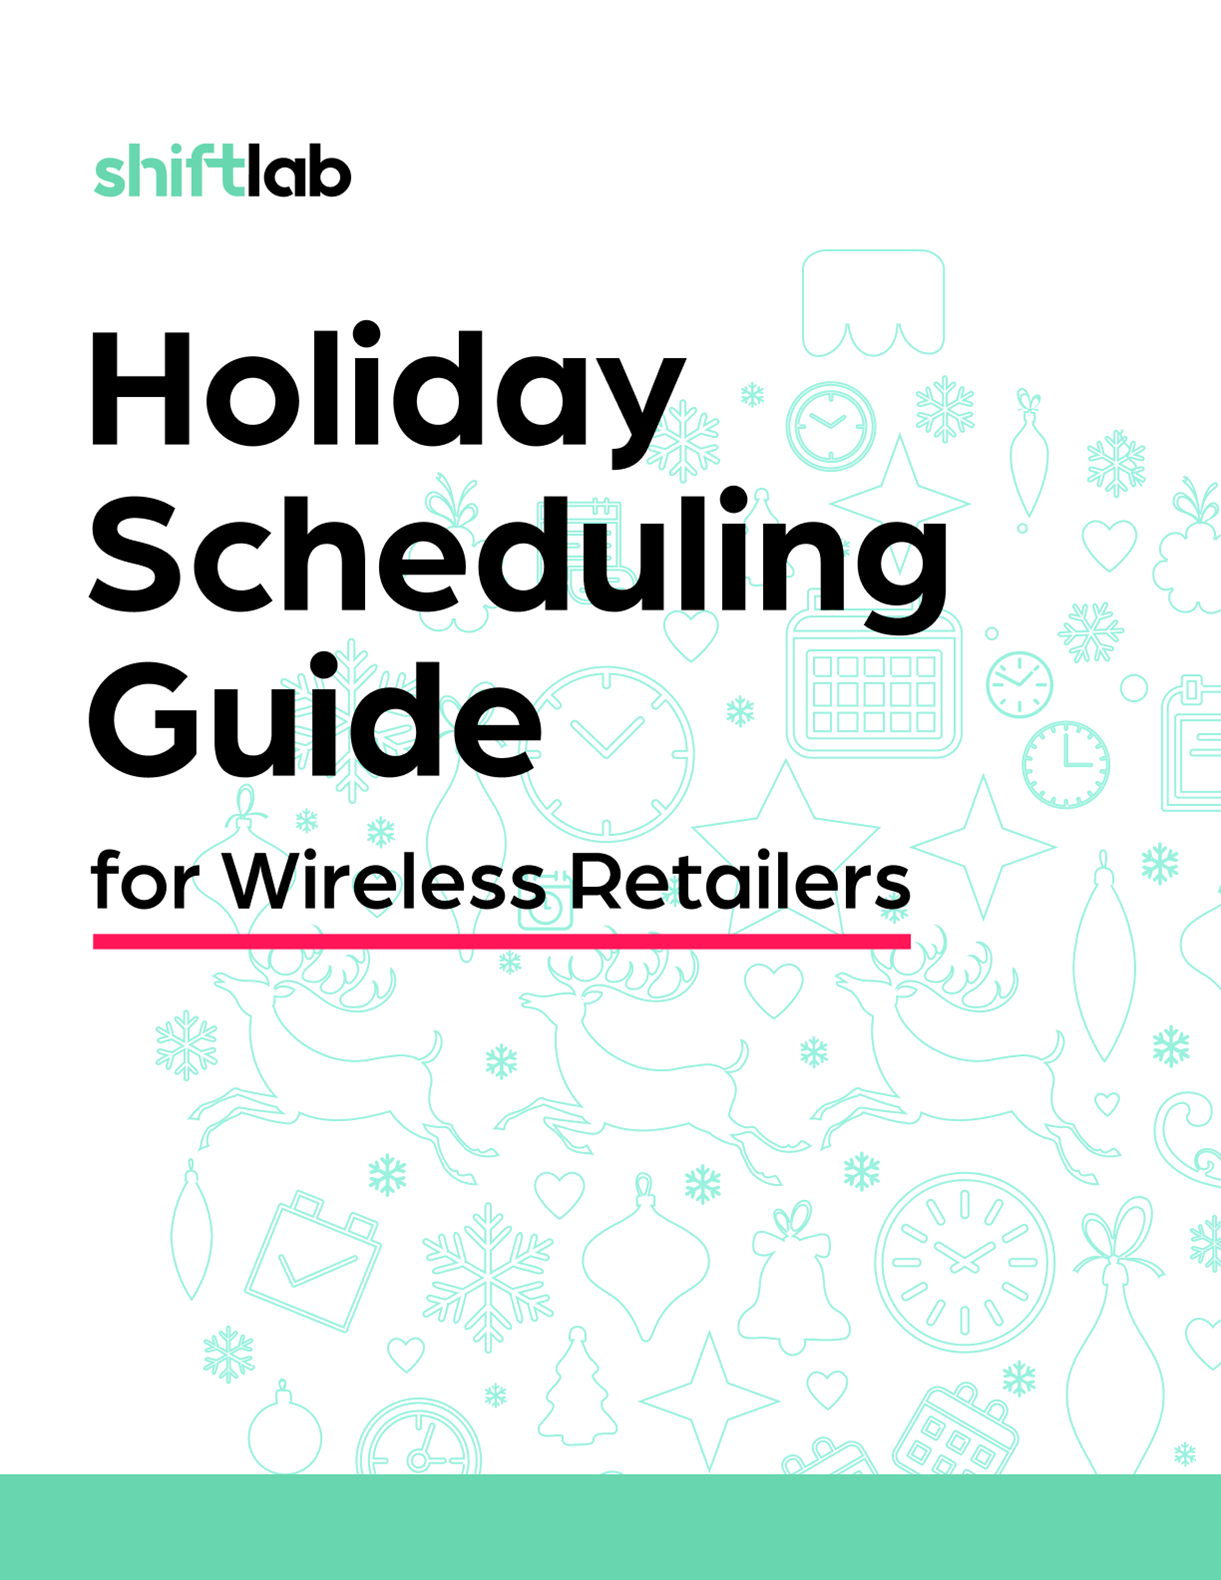 Holiday Scheduling Guide Image